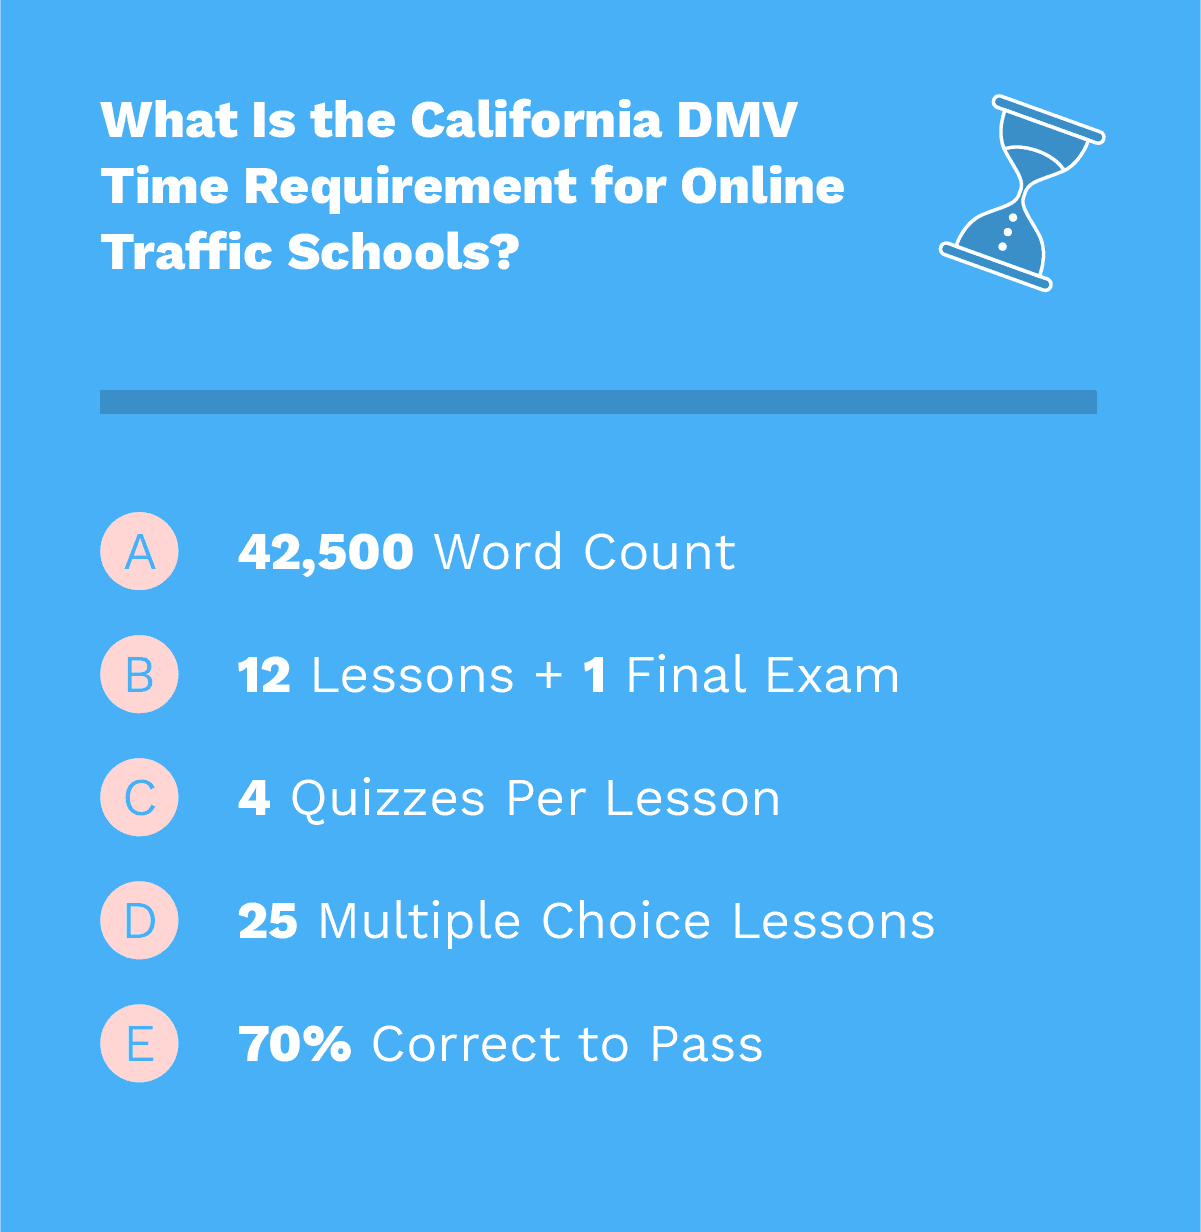 What Is The California DMV Time Requirement for Online Traffic Schools